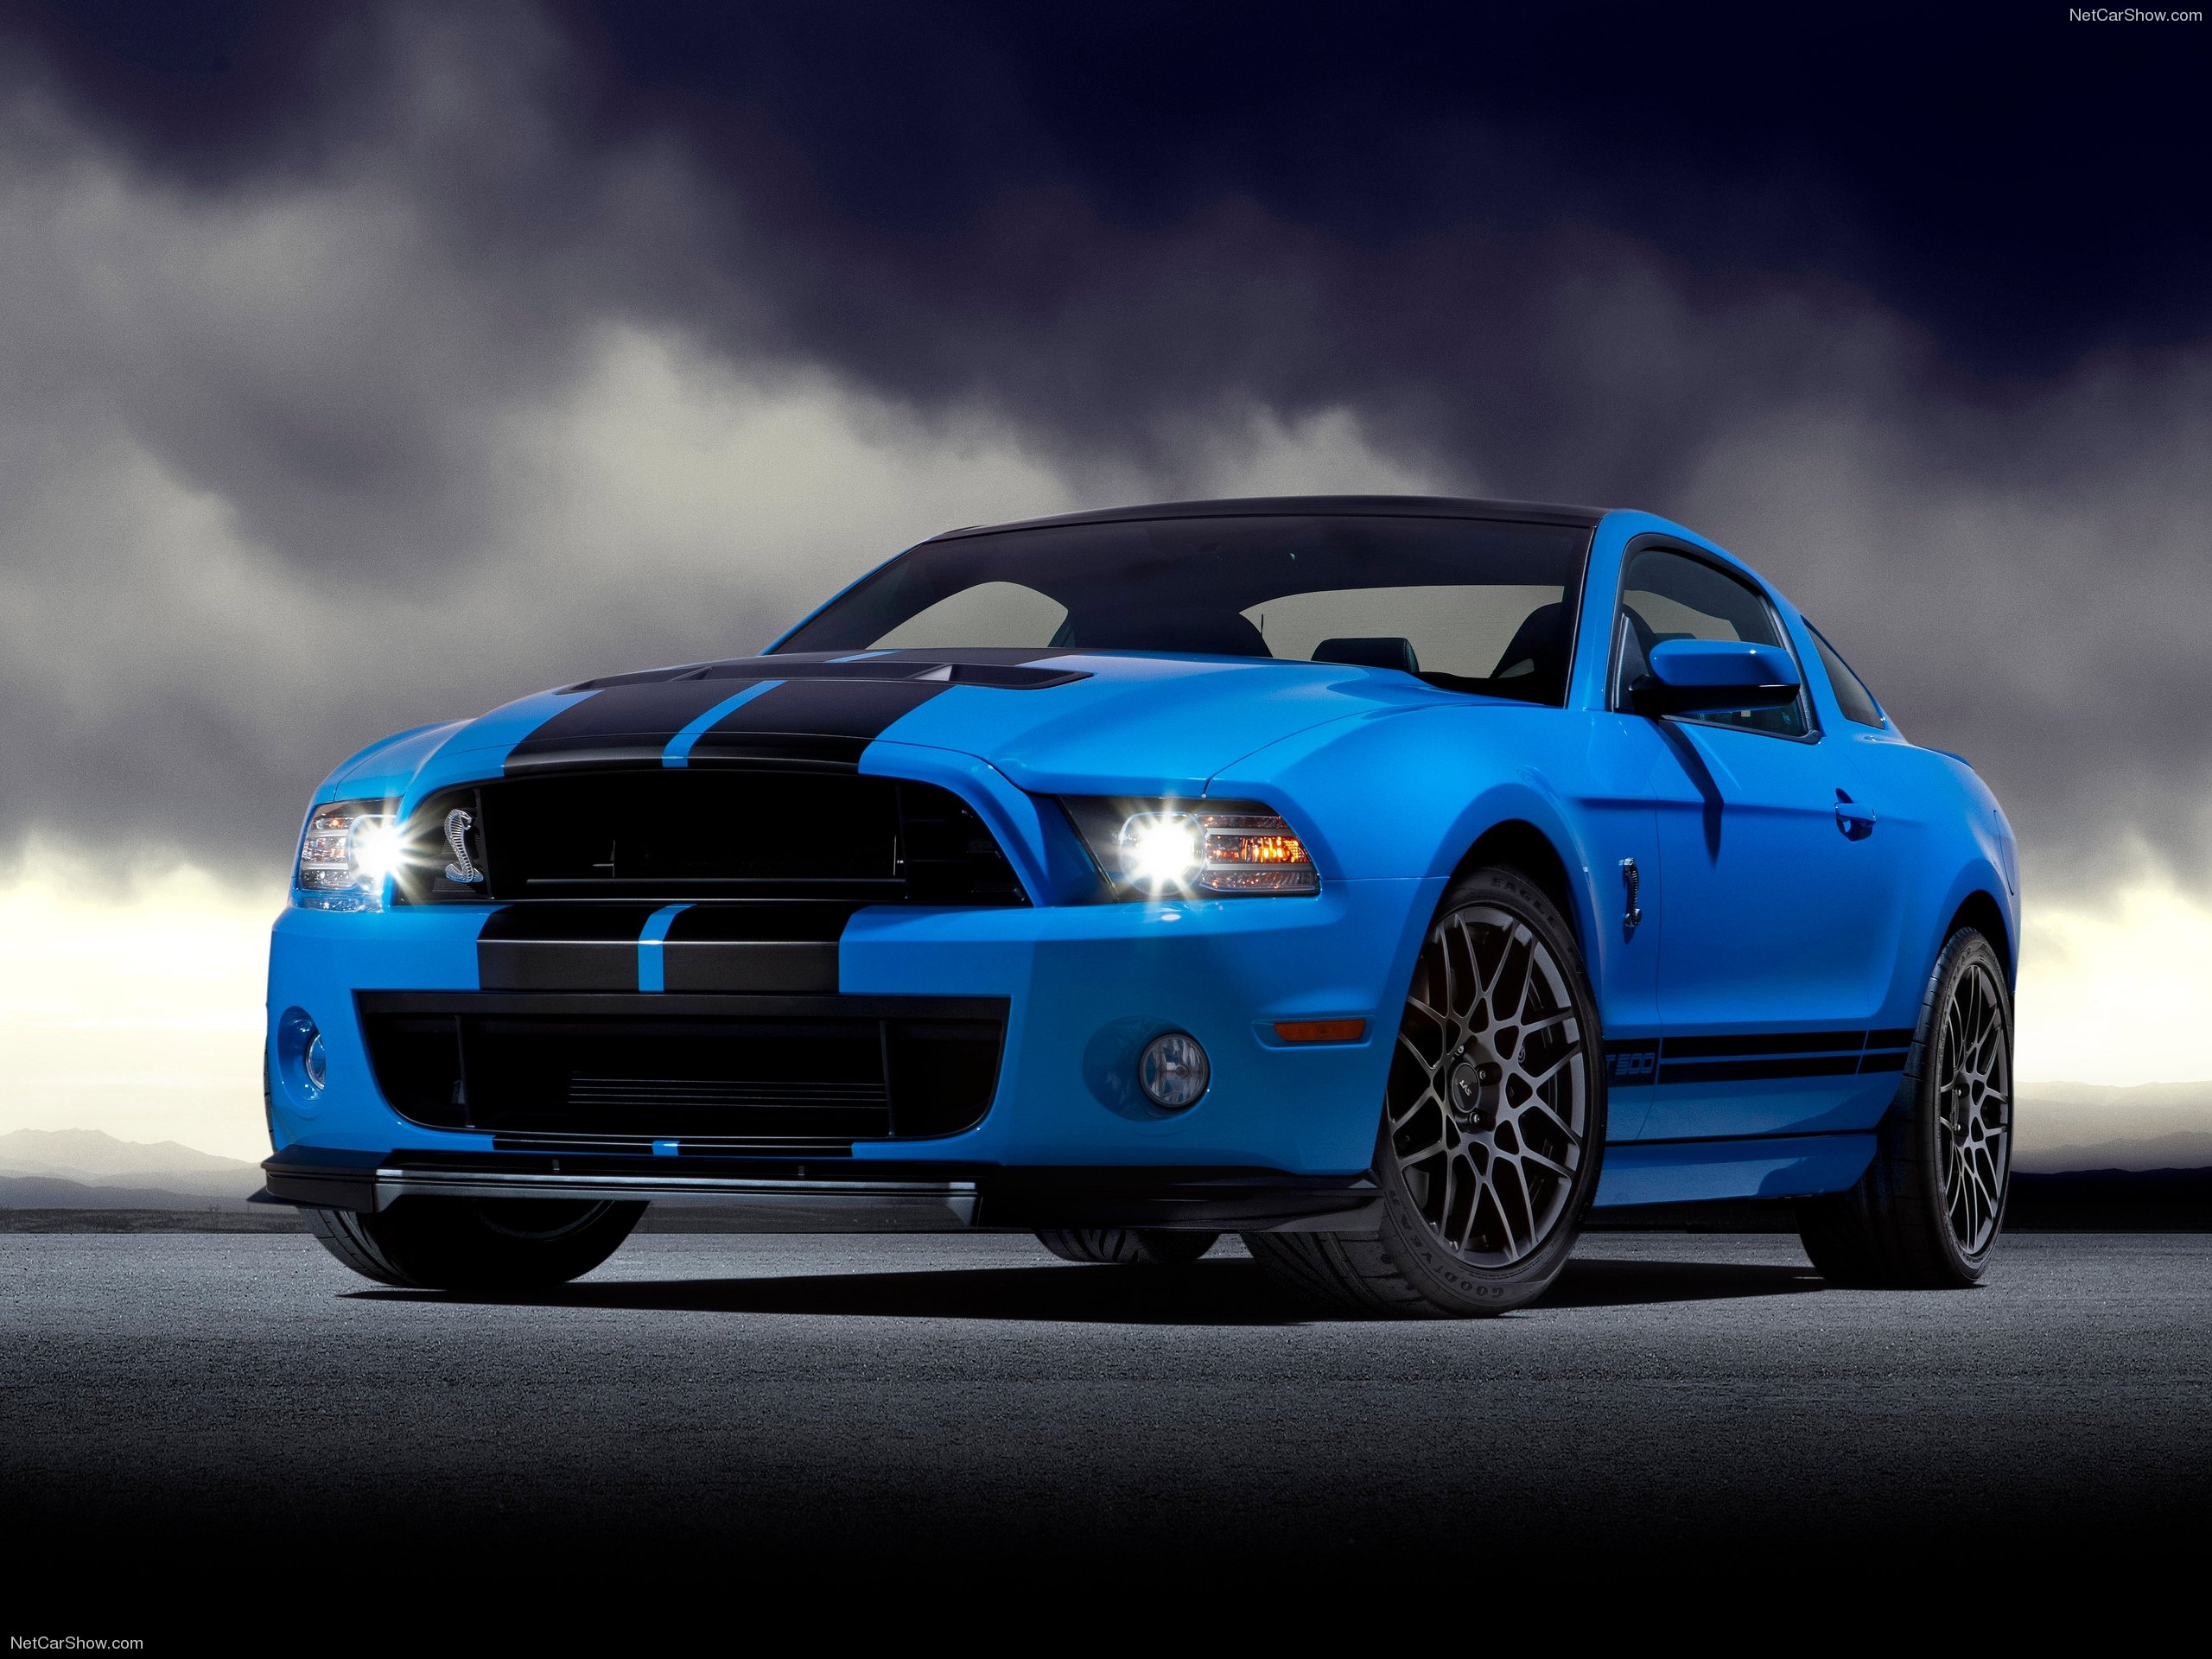 Nice Images Collection: Ford Mustang Shelby Cobra GT 500 Desktop Wallpapers